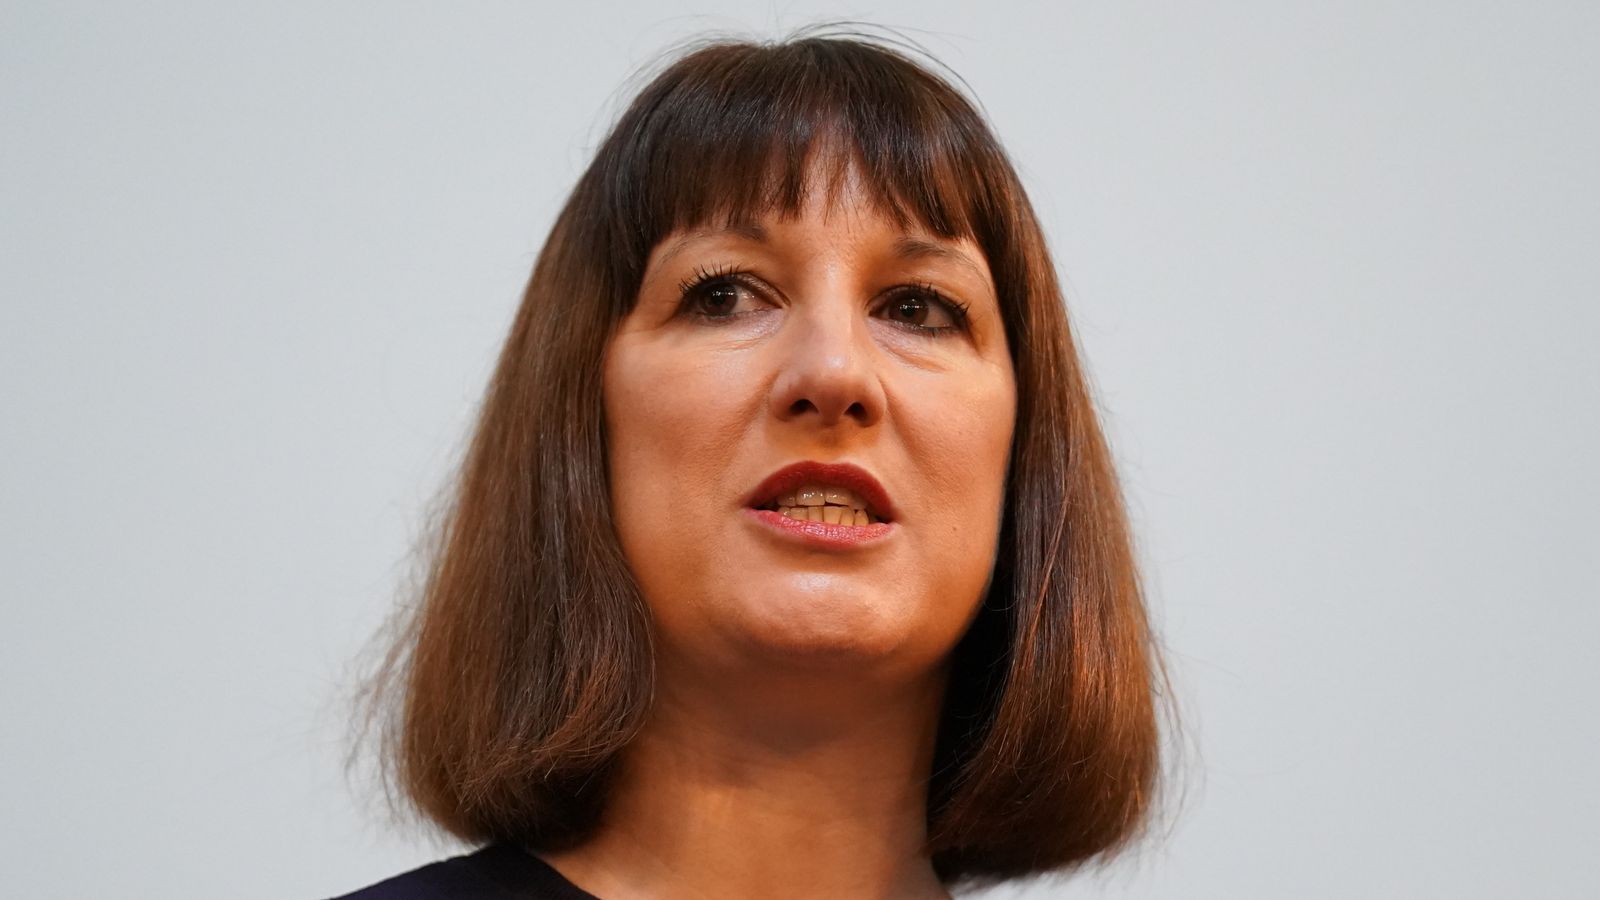 Labour would stop stop energy price cap rise and forced installation of prepayment meters, says Rachel Reeves